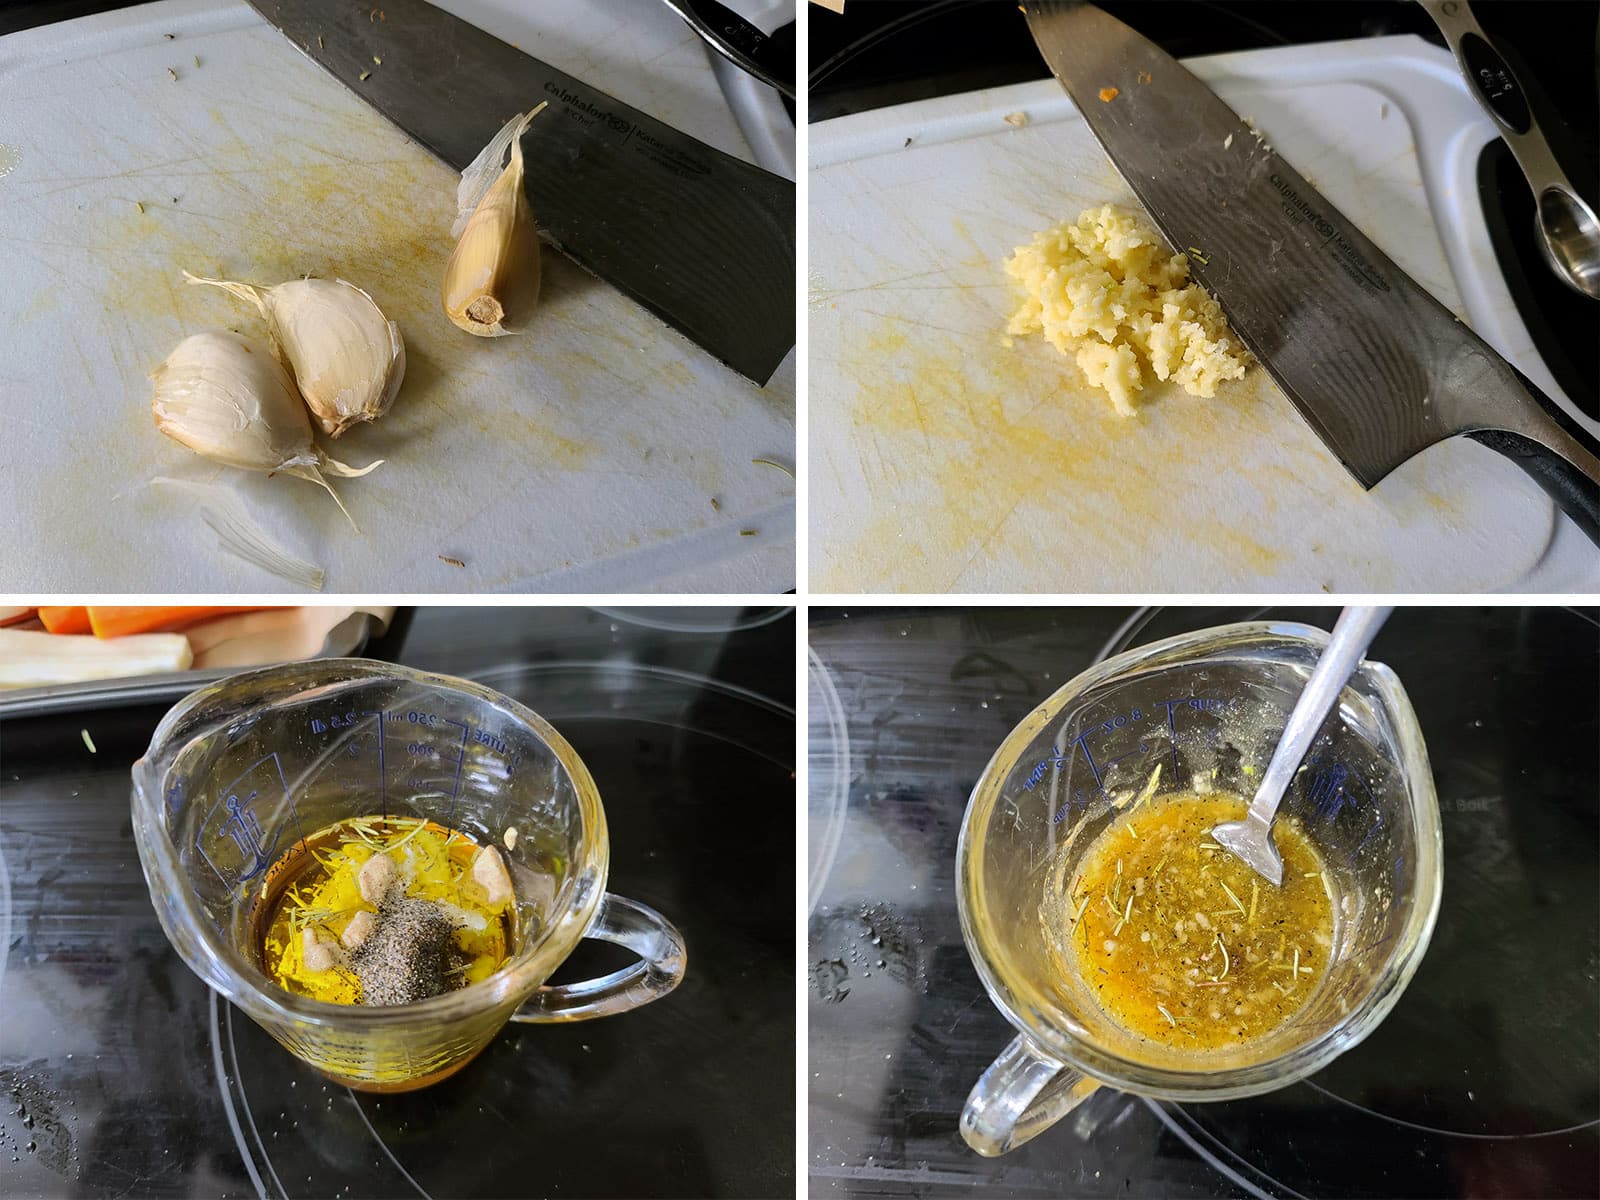 A 4 part image showing the garlic being pressed and the sauce being mixed.